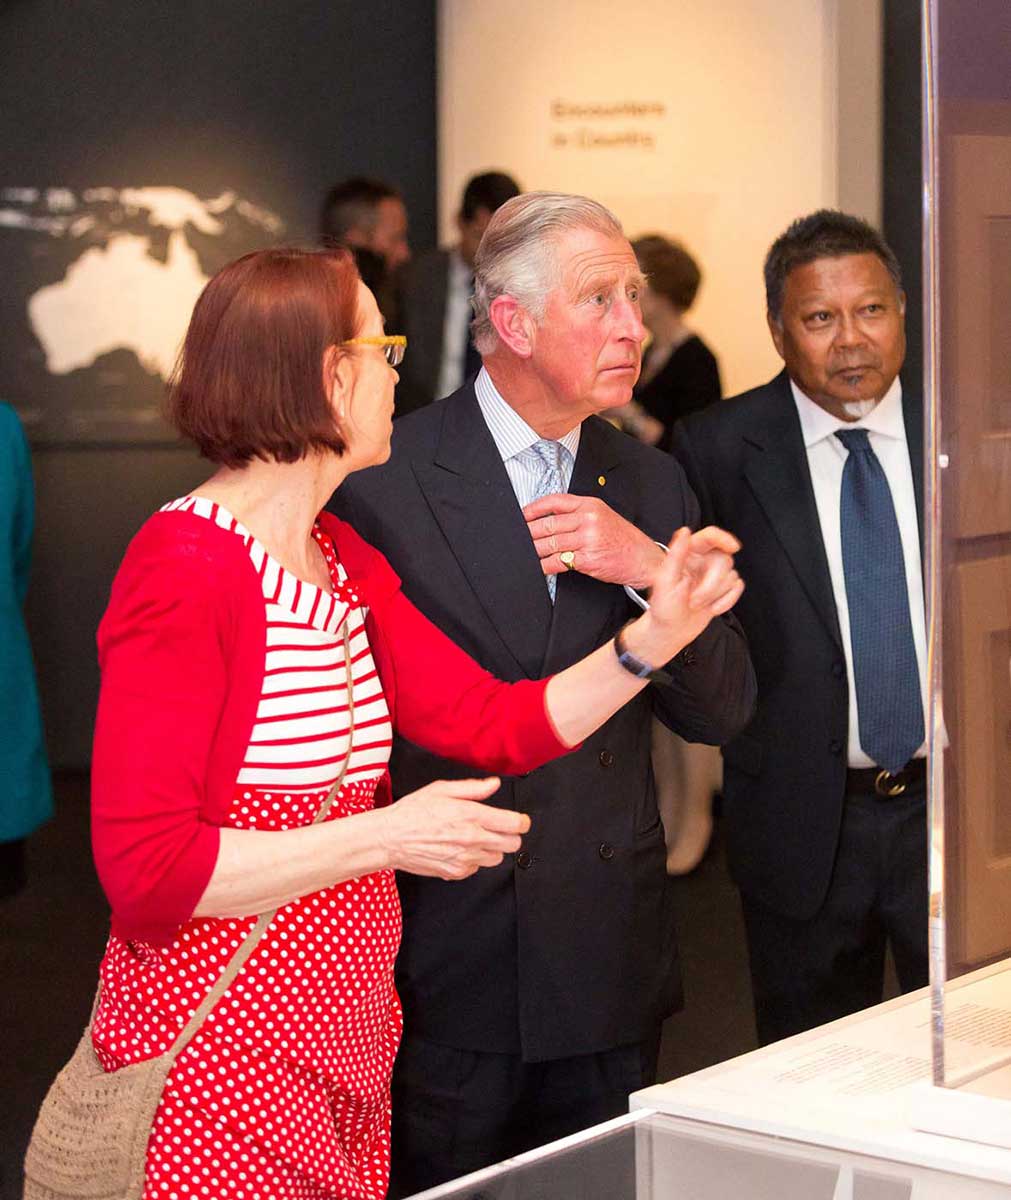 Gaye Sculthorpe talking to the HRH Prince Charles and Peter Yu. - click to view larger image